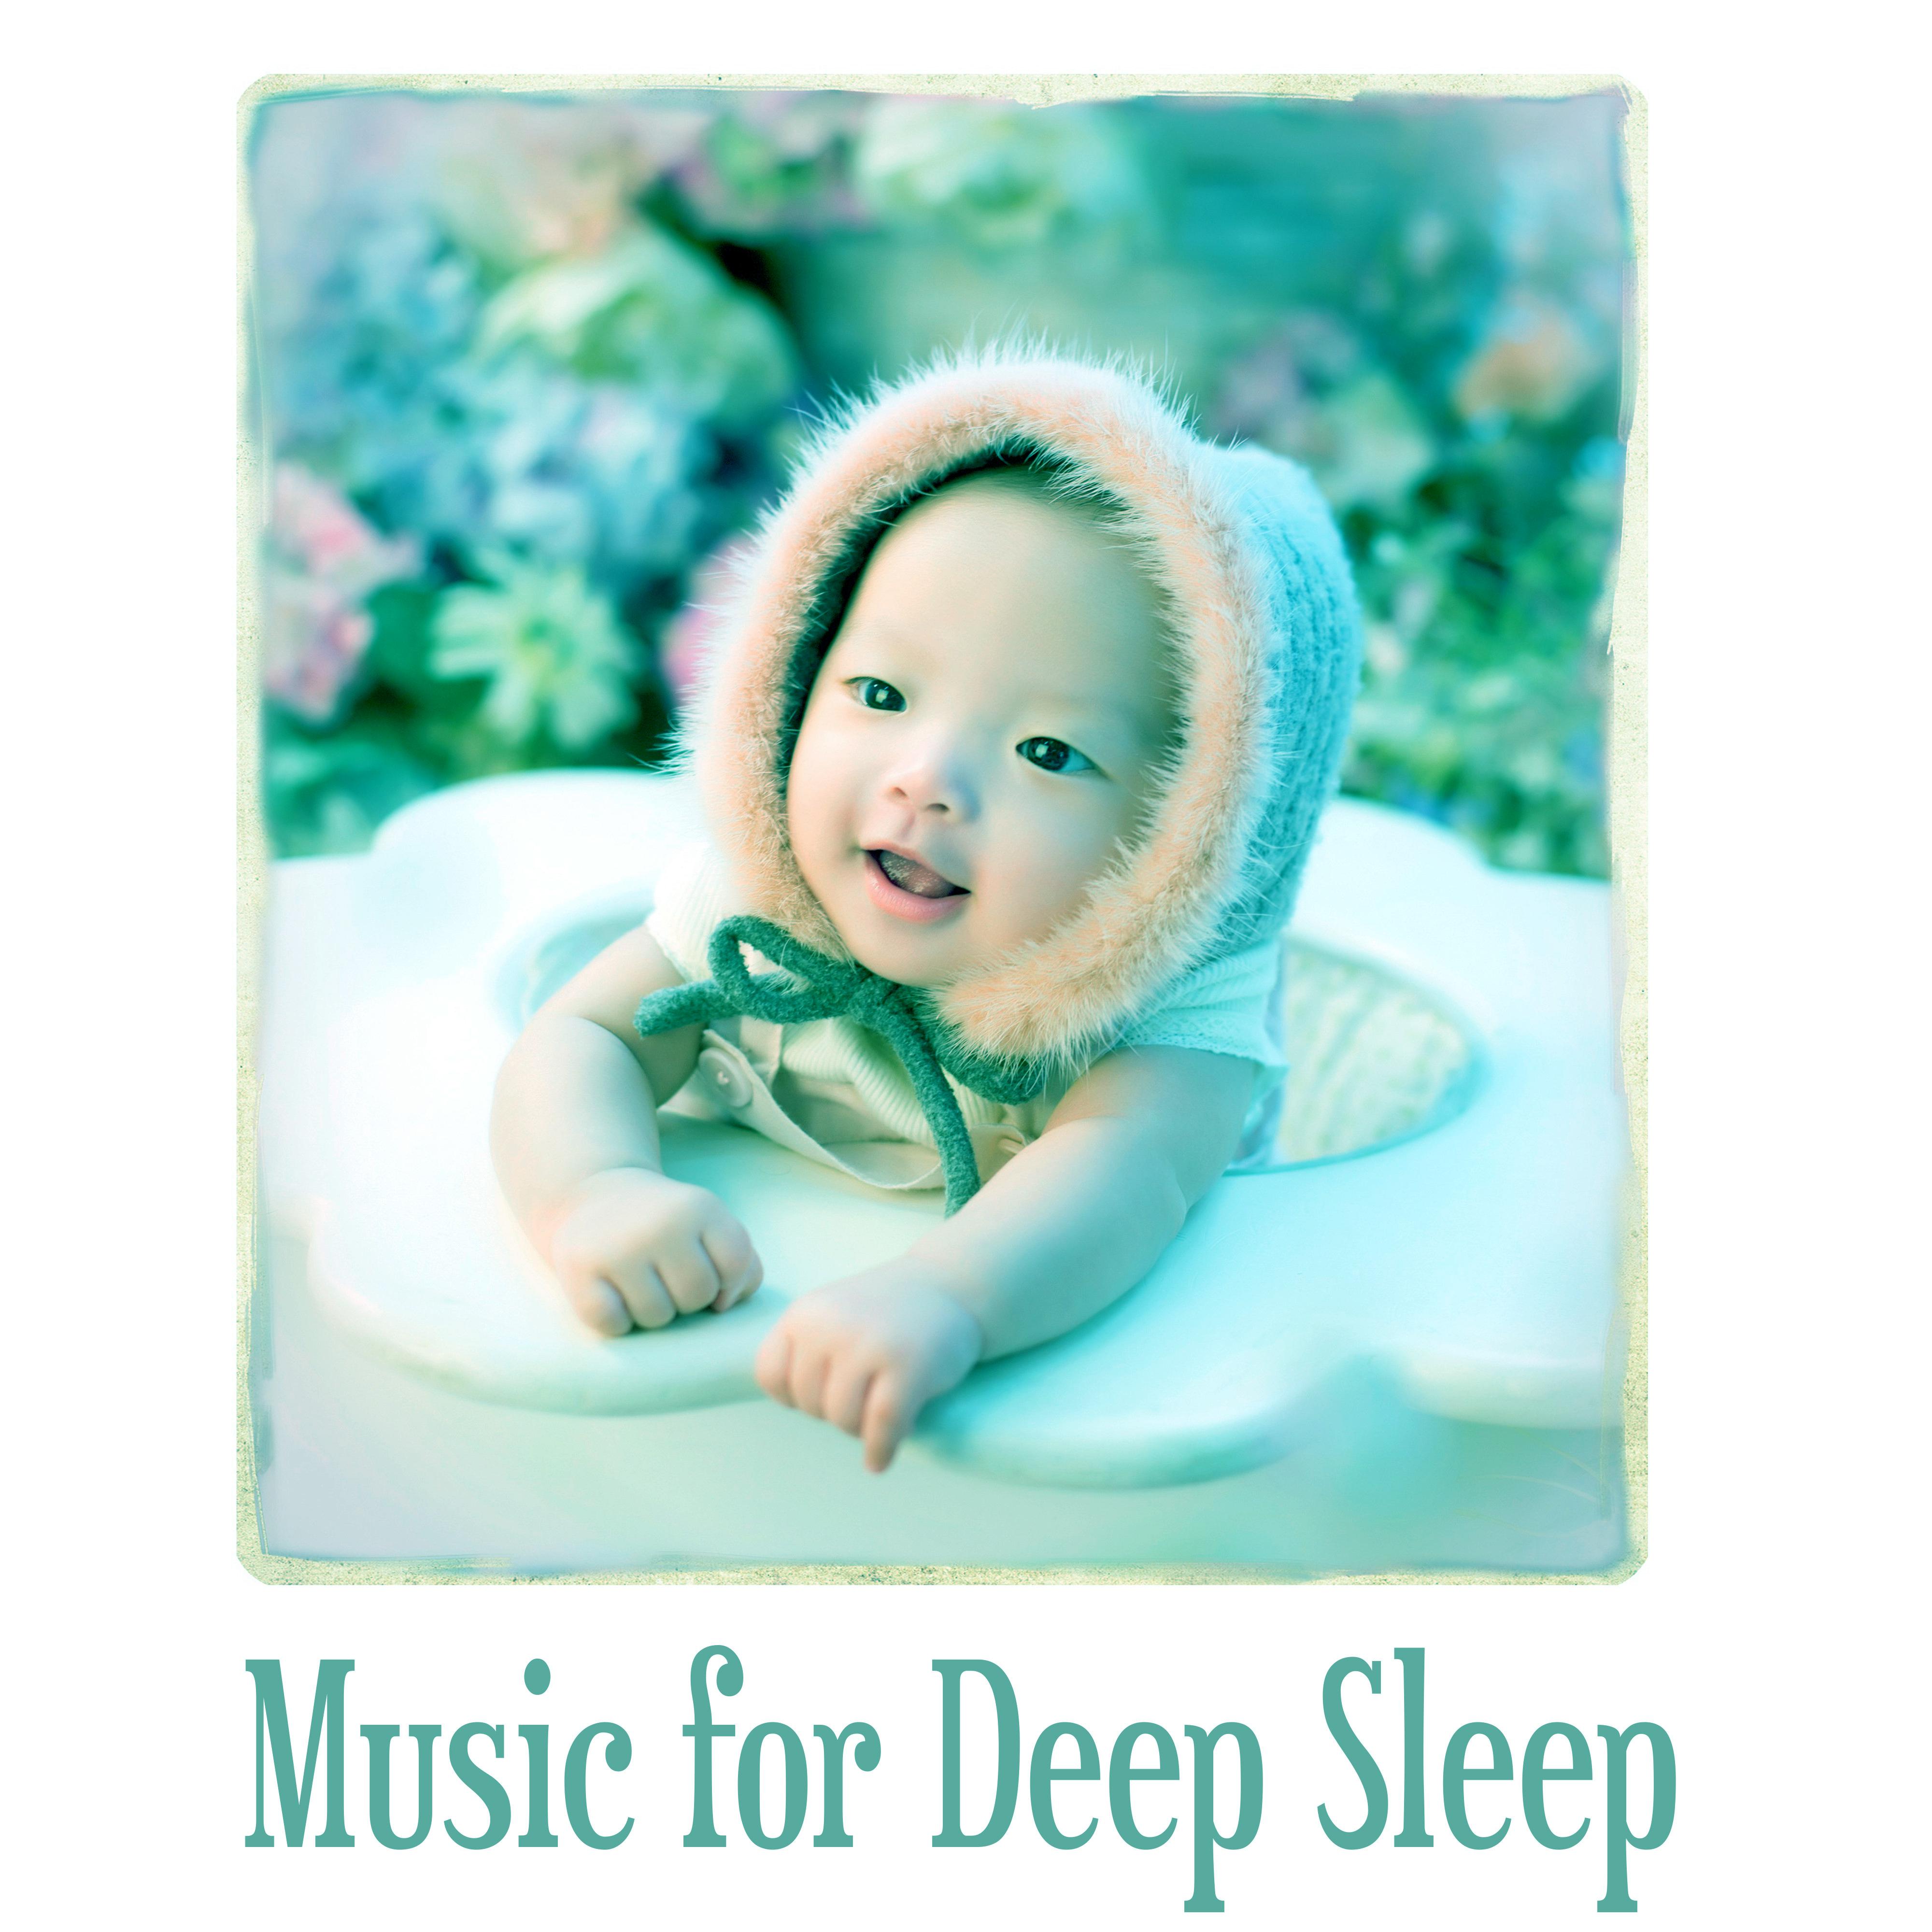 Music for Deep Sleep  Music for Relax, Healing Music, Smooth Sounds for Sleep, Lullaby